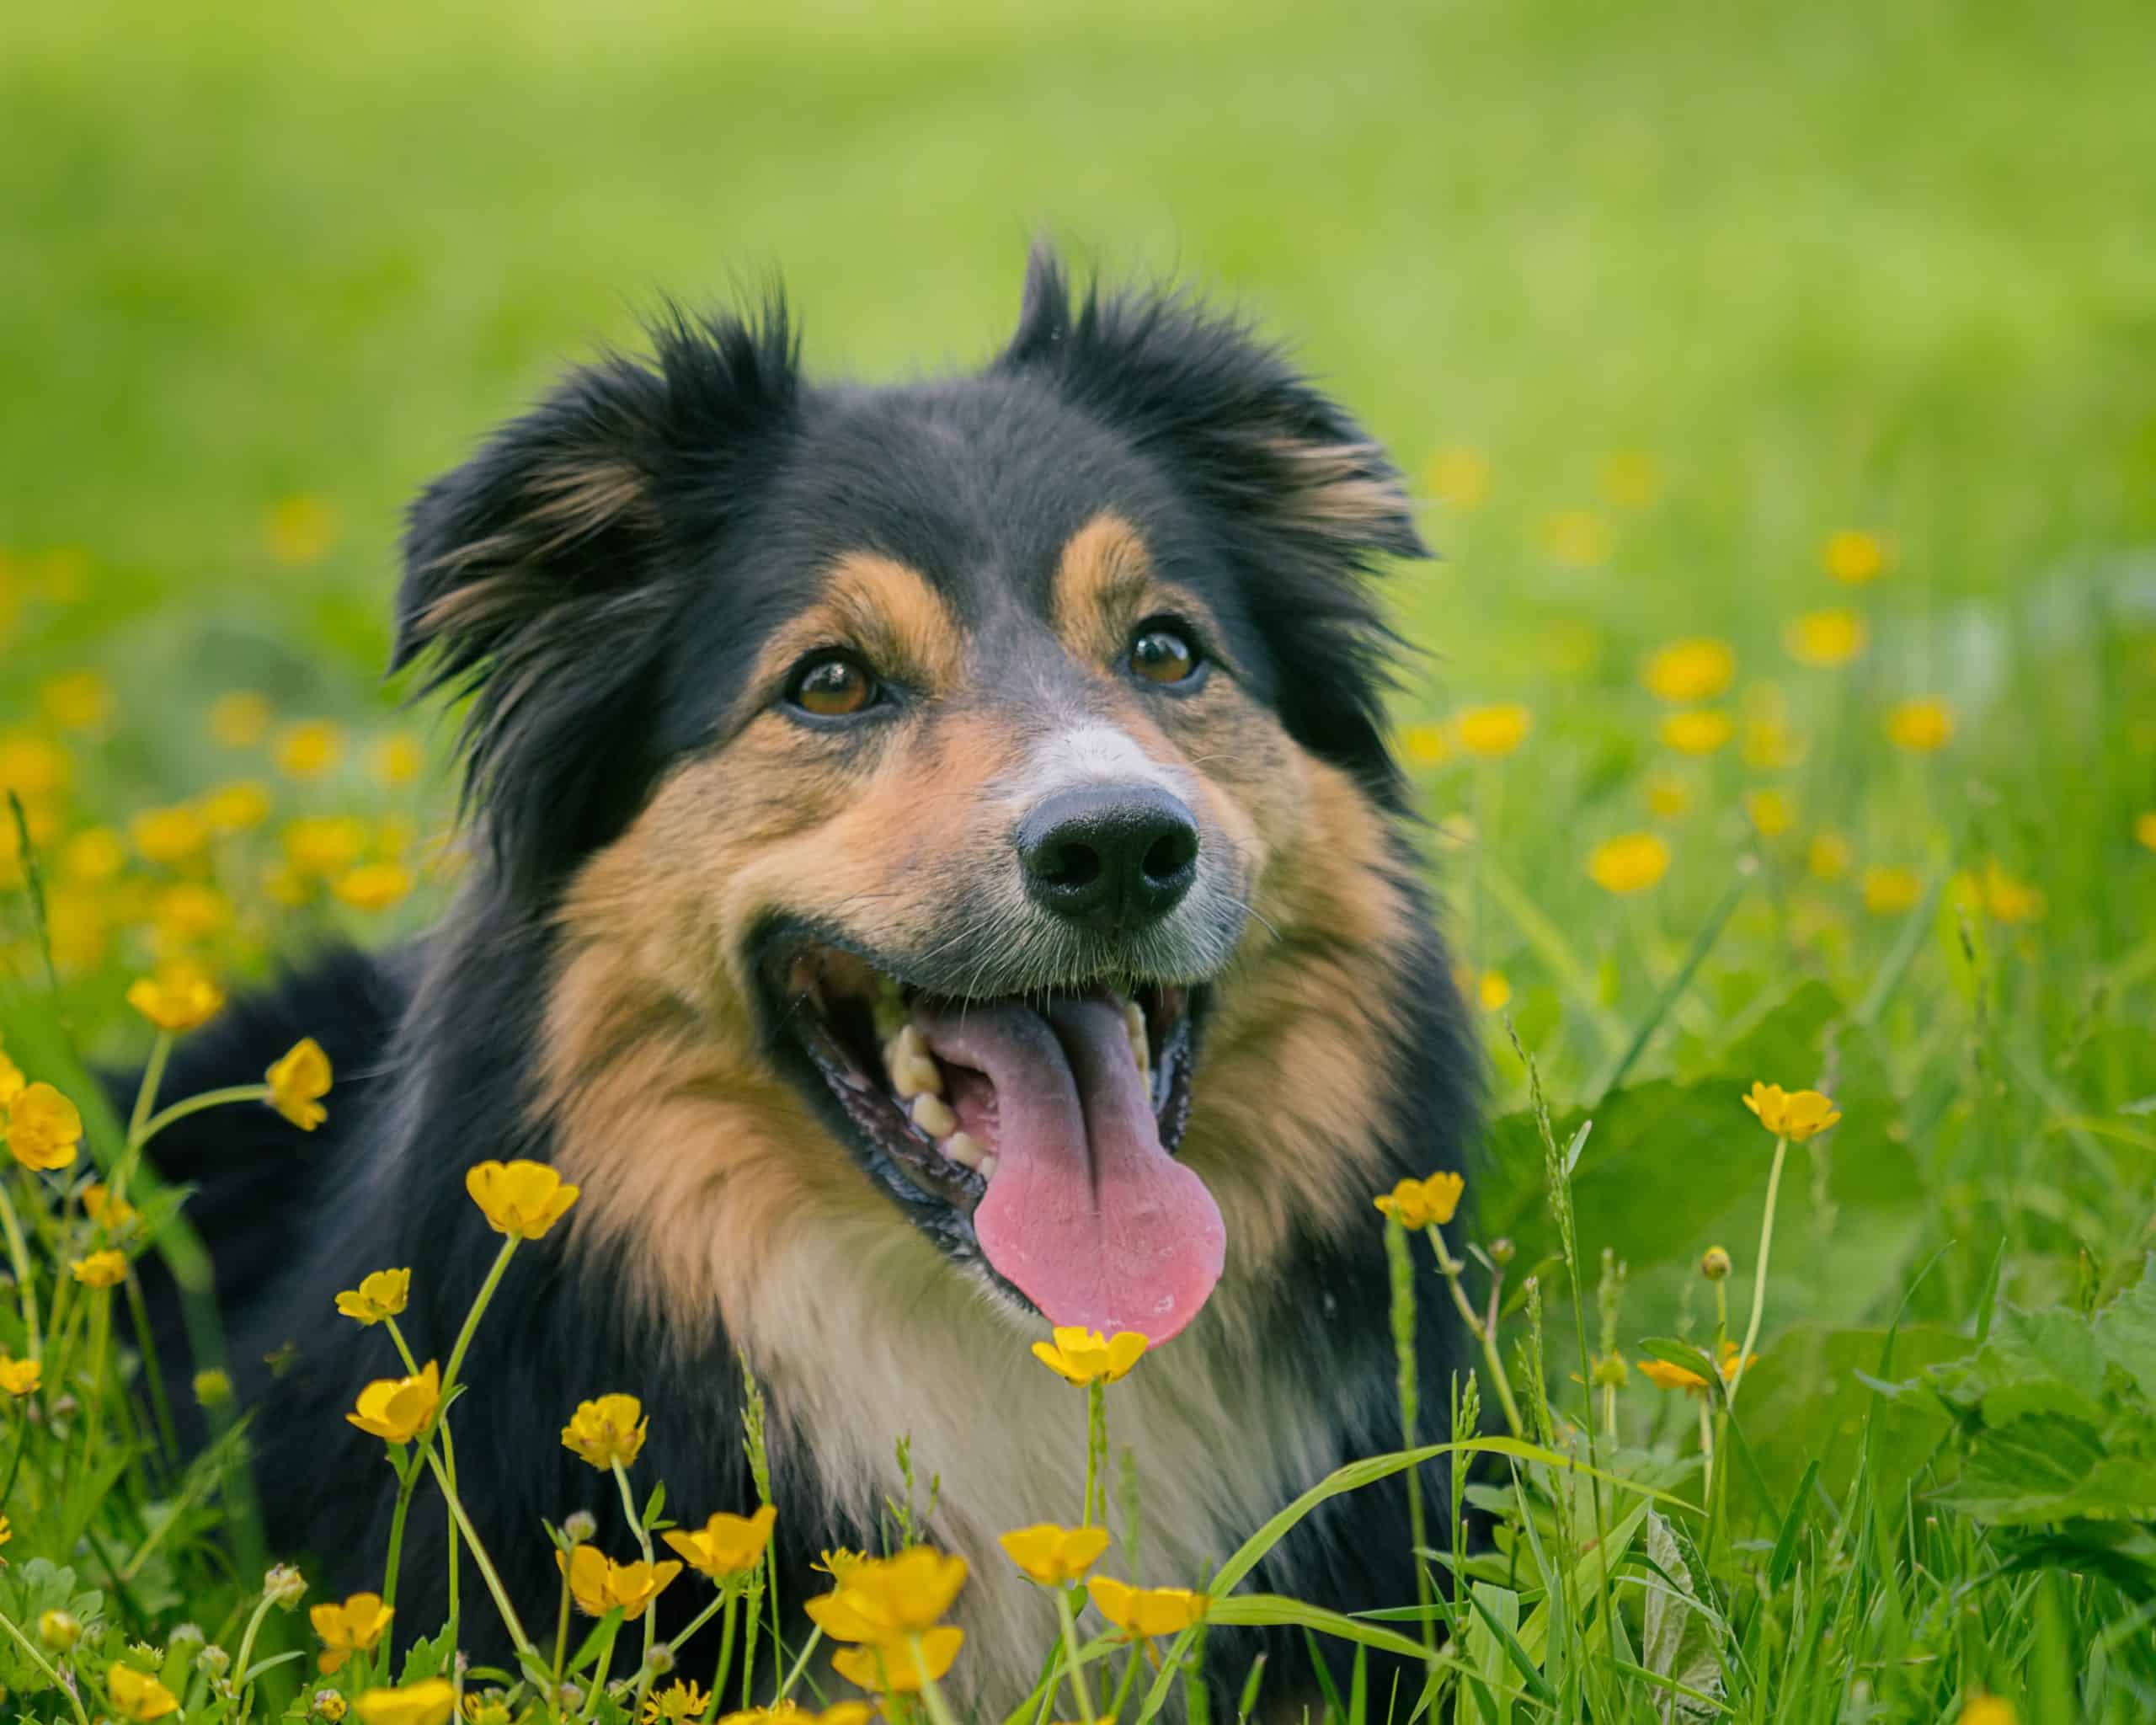 A Border Collie lays down among buttercups in the grass.